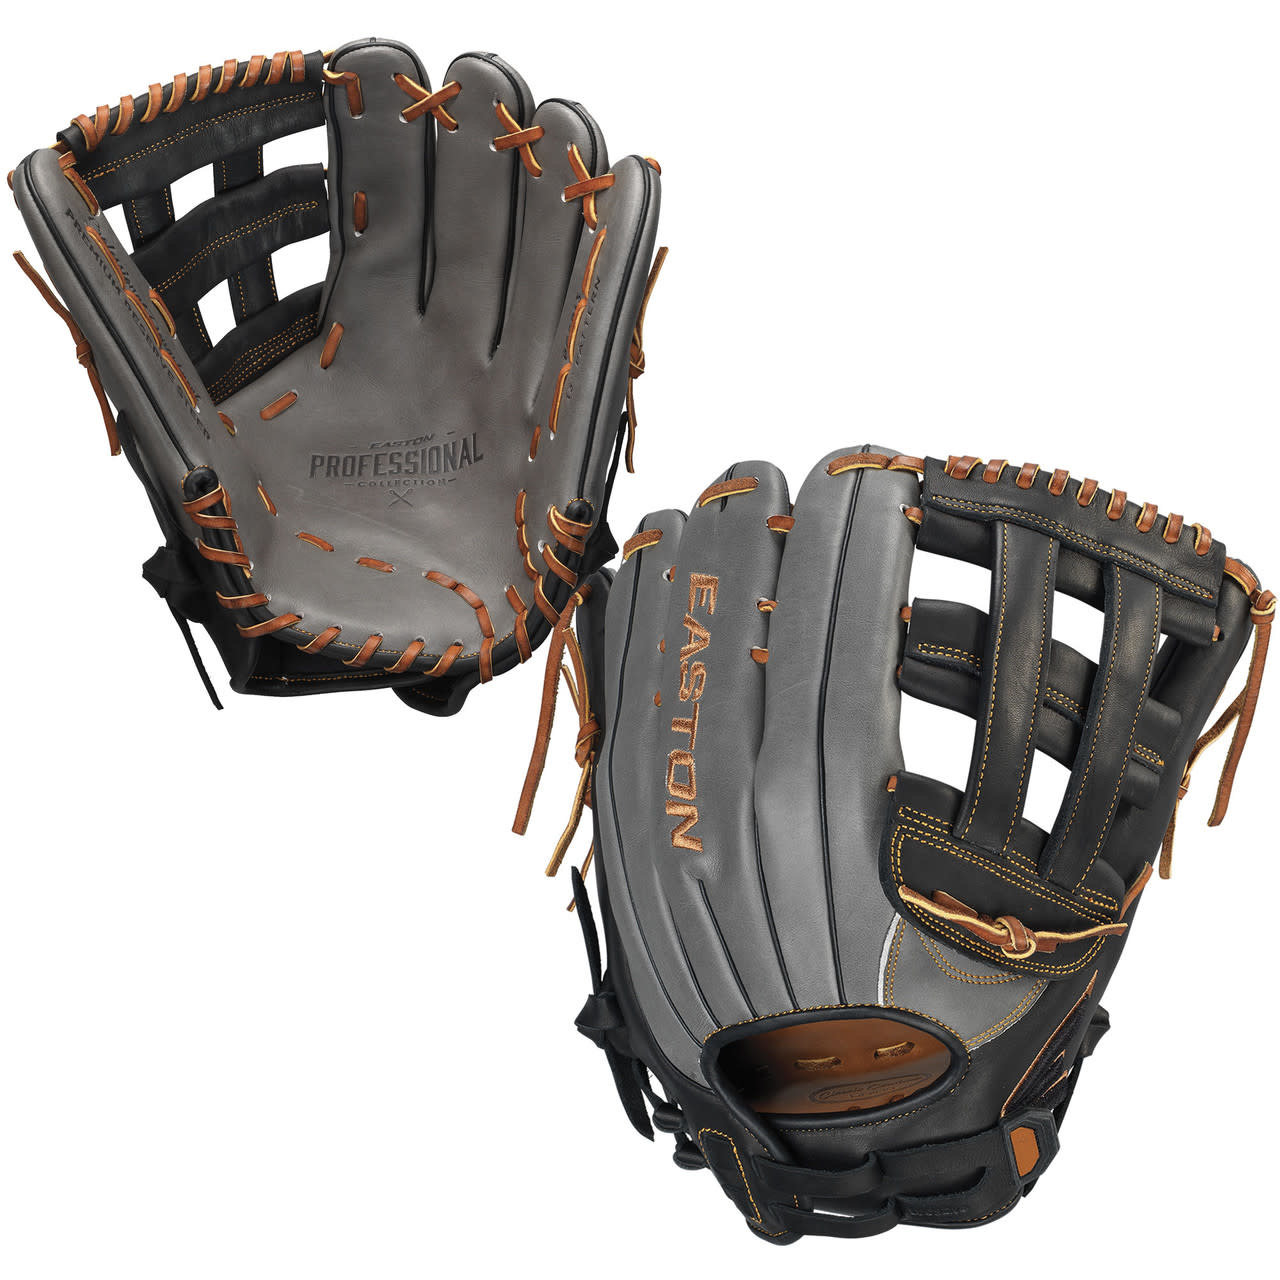 EASTON Professional Collection 13'' PCSP13 Slowpitch Softball Glove